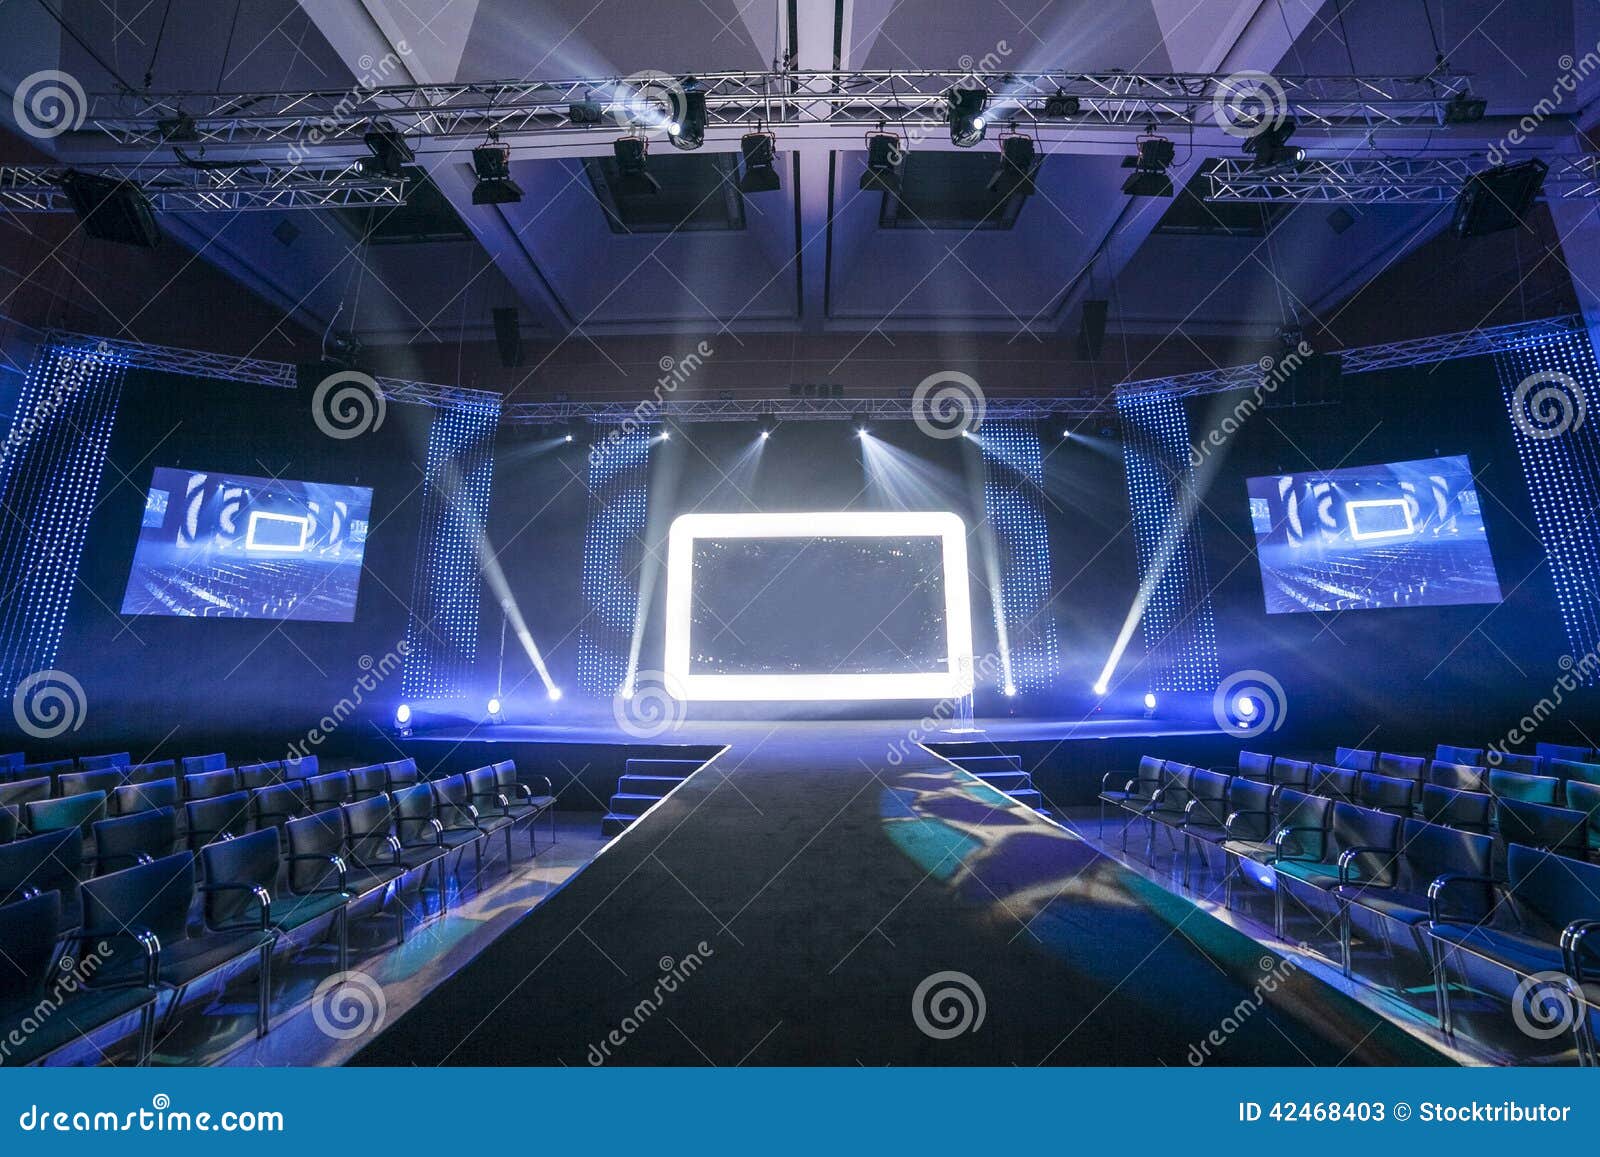 Conference room stock image. Image of convention, empty - 42468403